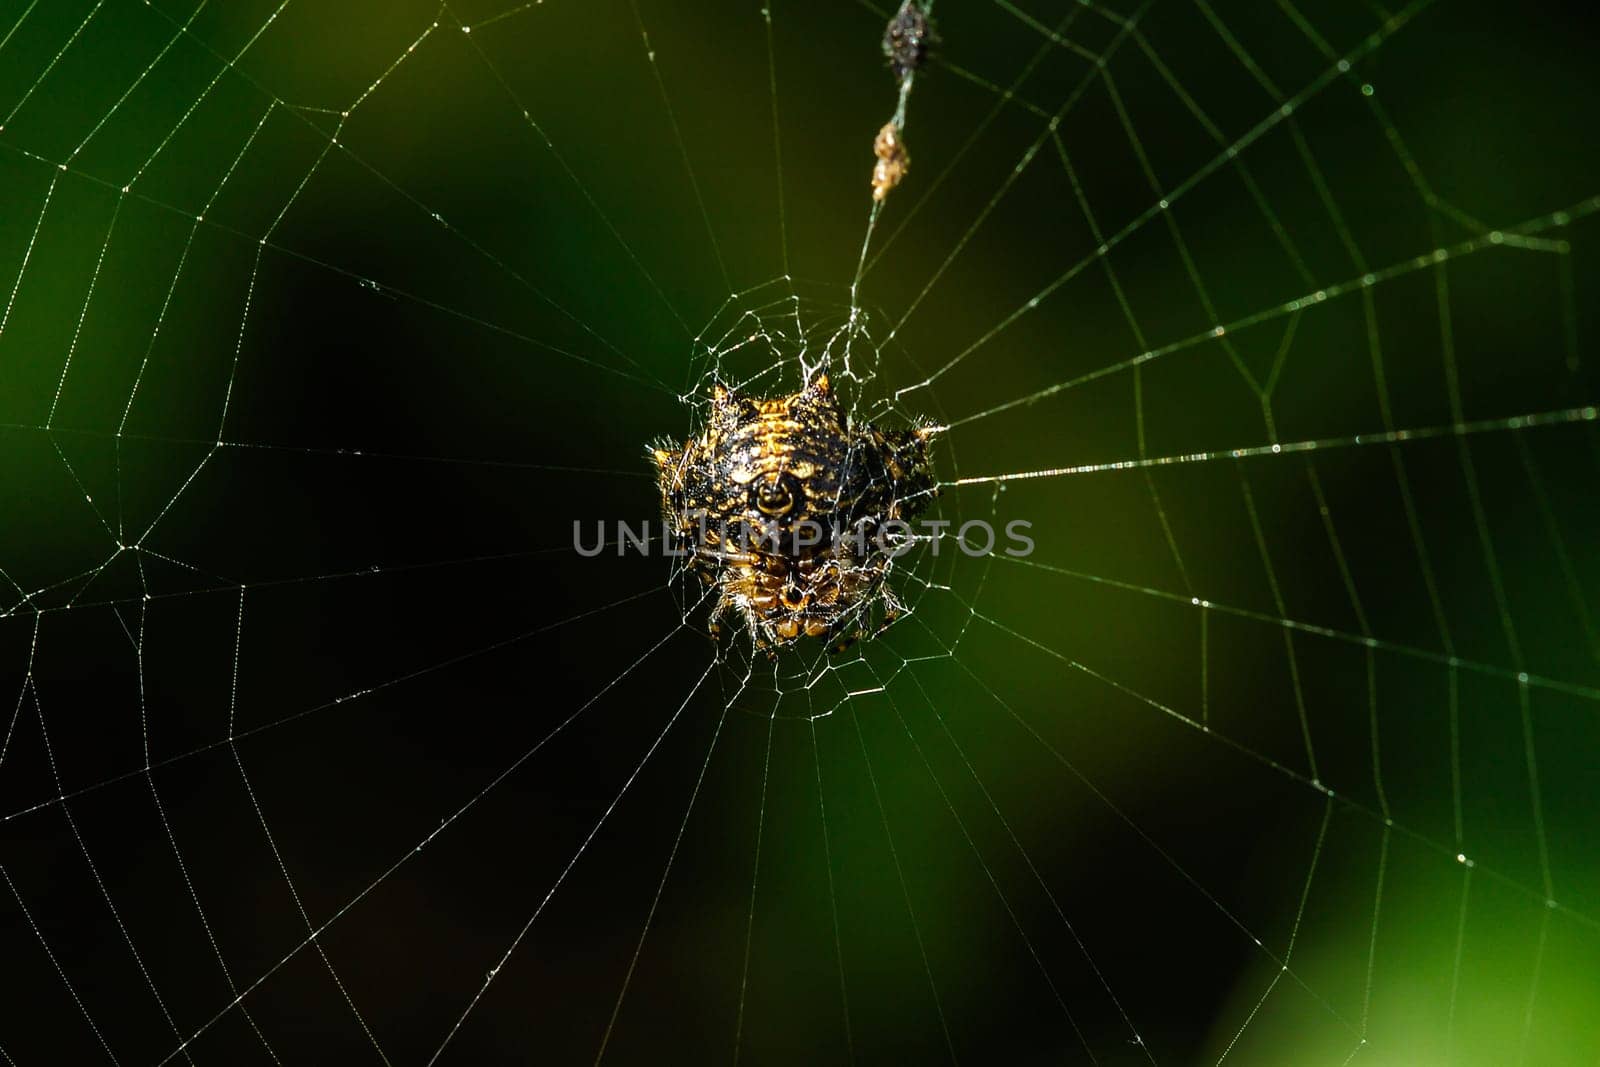 The spider is on the web. by Puripatt